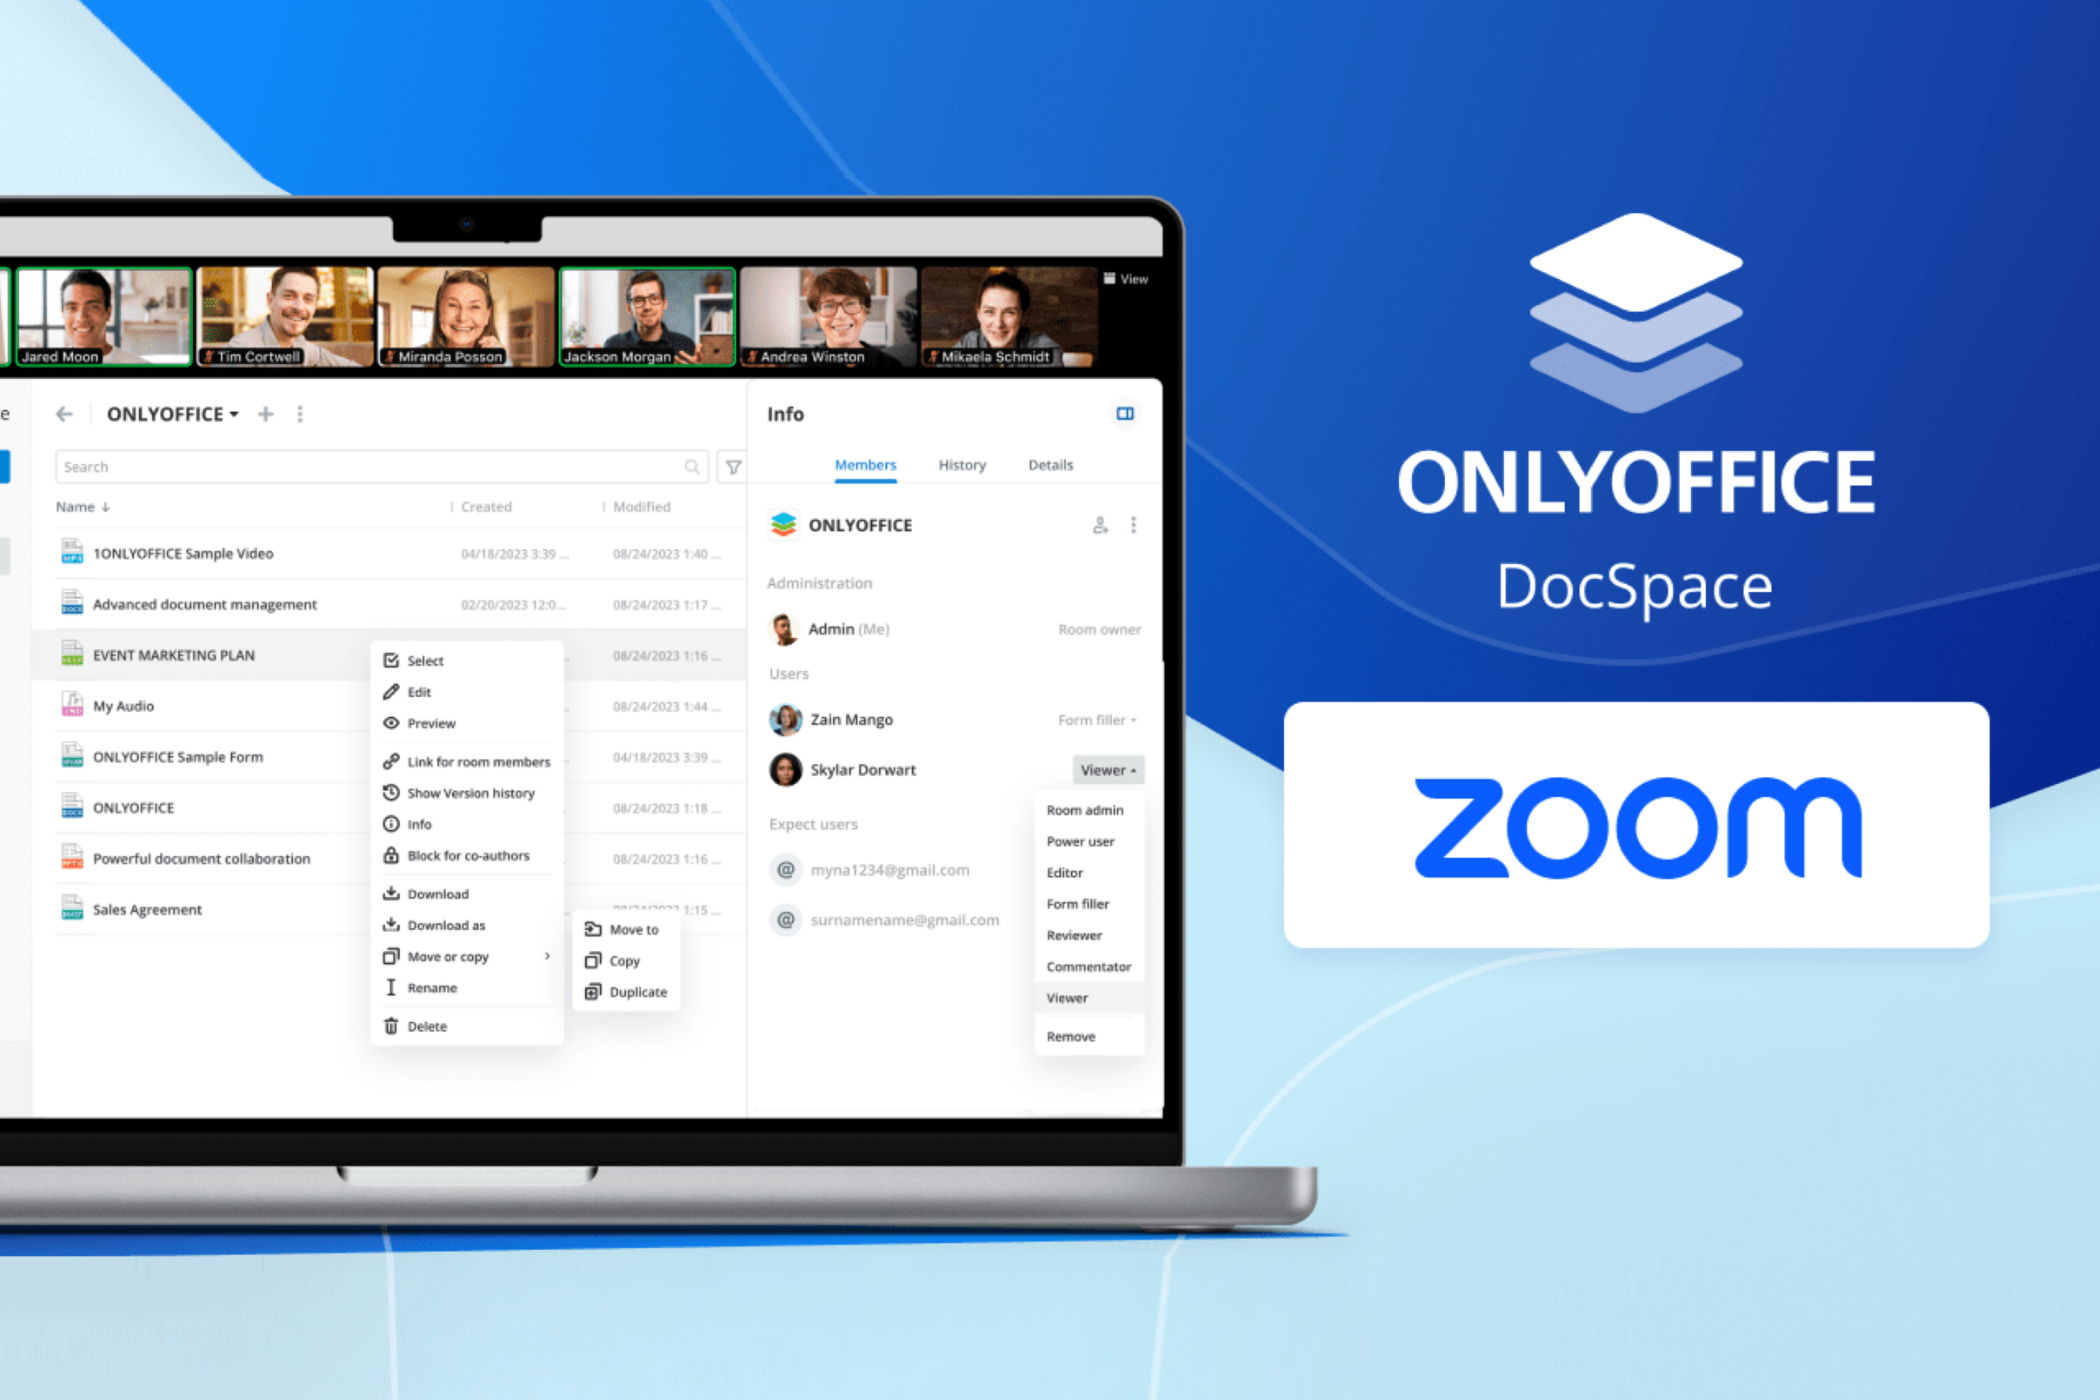 ONLYOFFICE DocSpace for Zoom Availability Image